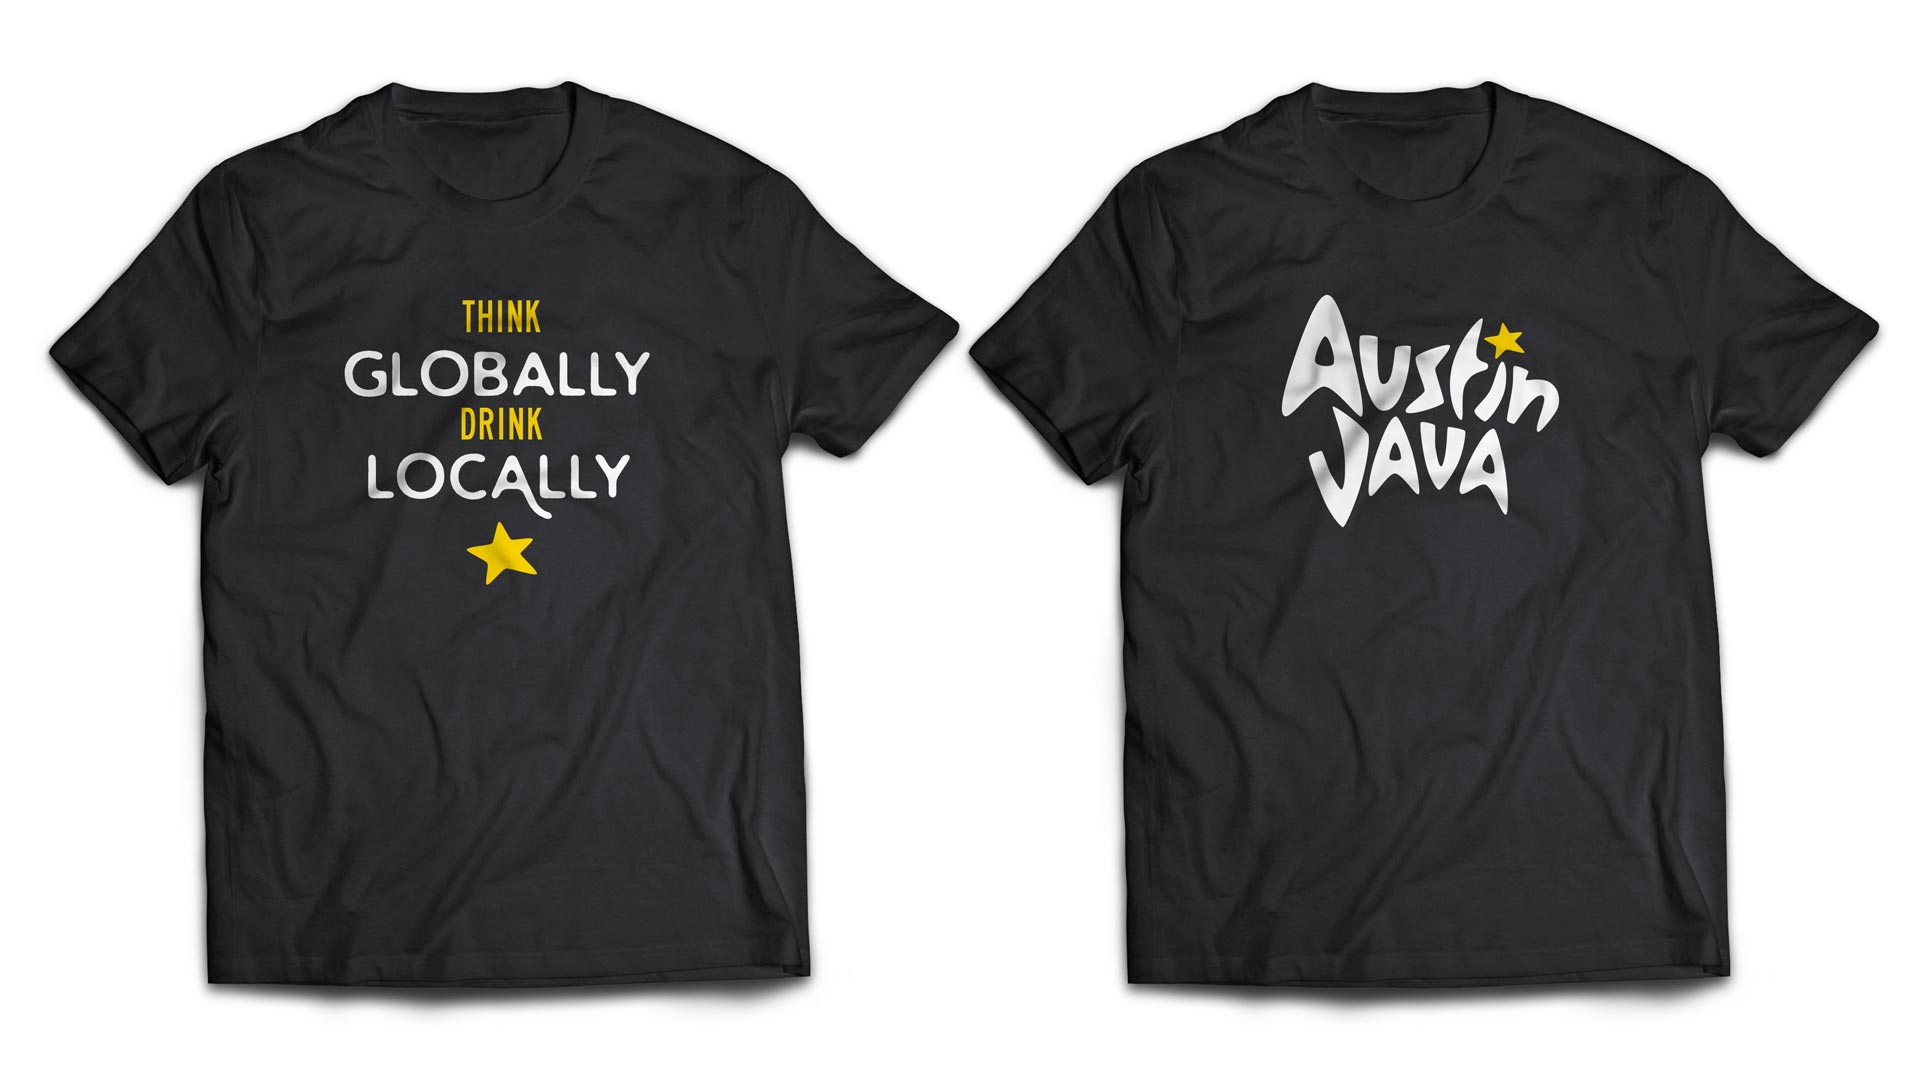 T-shirt design for Austin Java reading "Think Globally, Shop Locally"